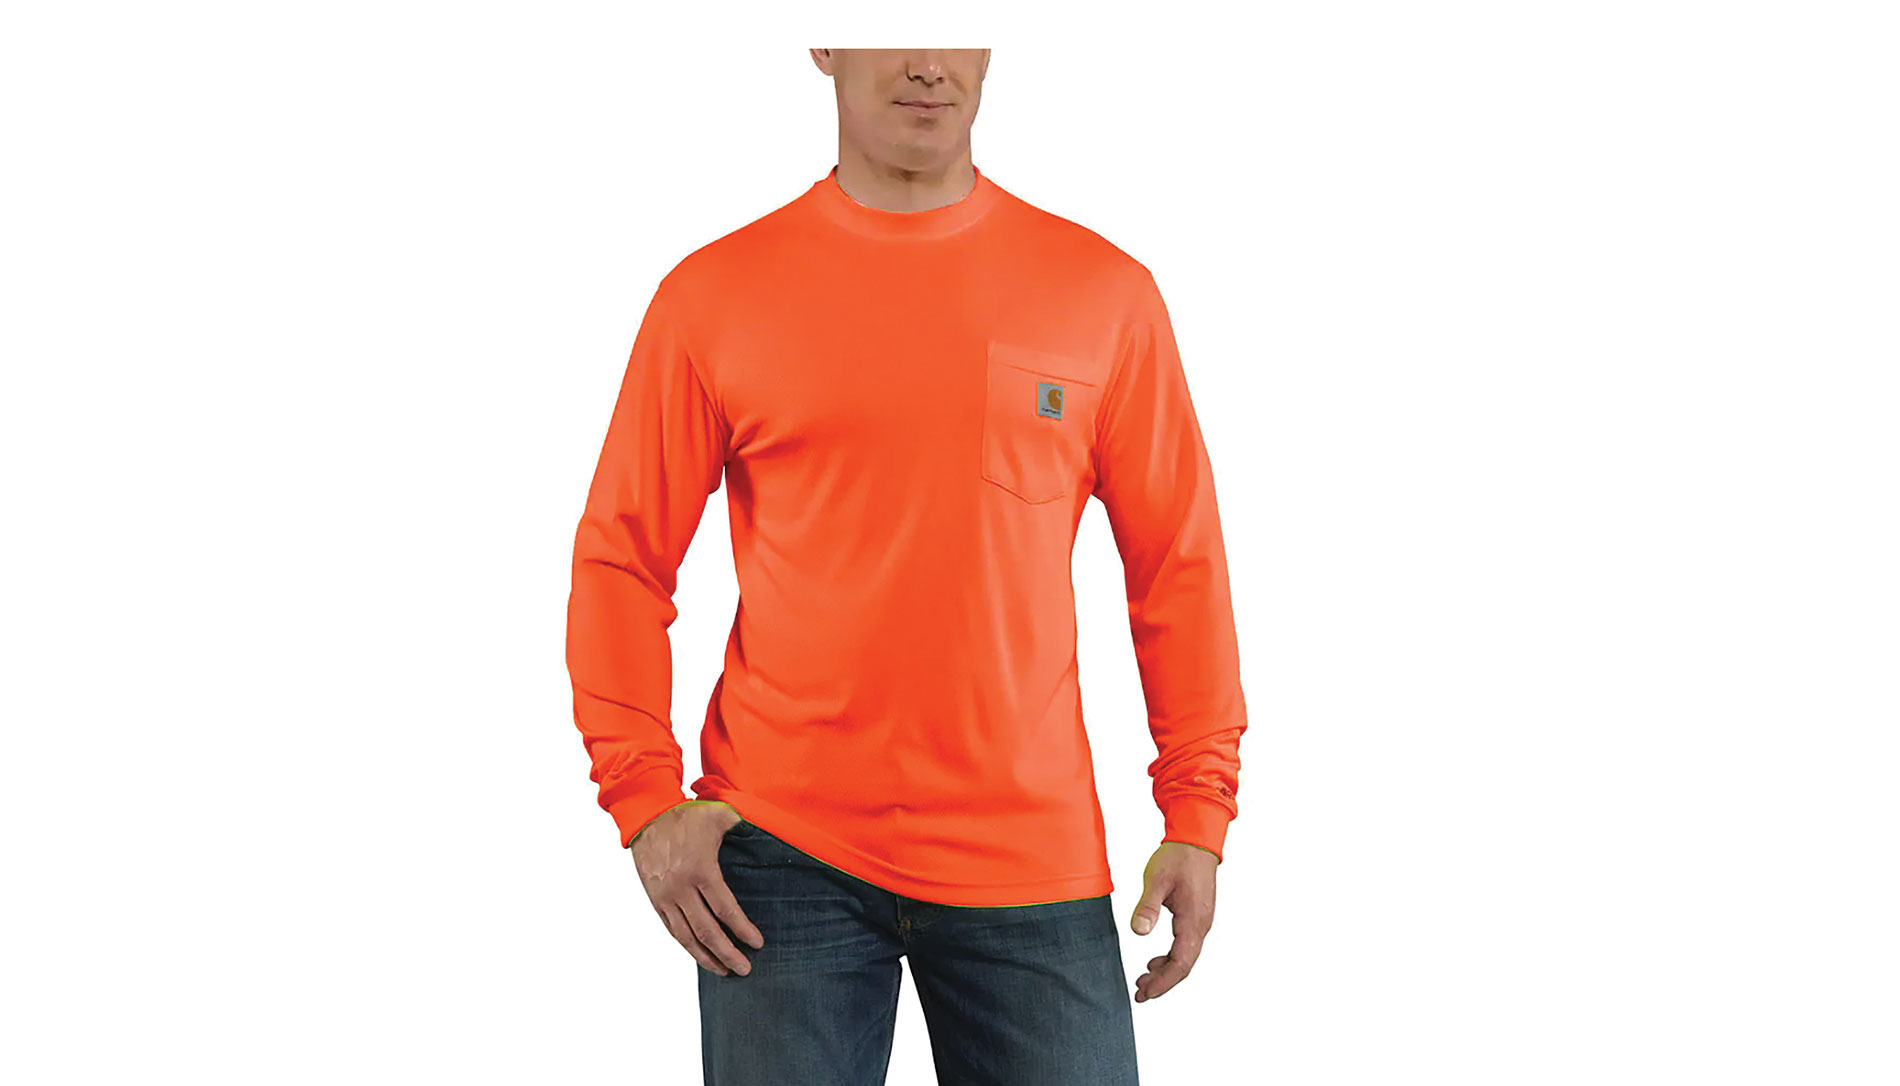 A man wears jeans and an orange shirt with the Carhartt logo. Image by Carhartt.